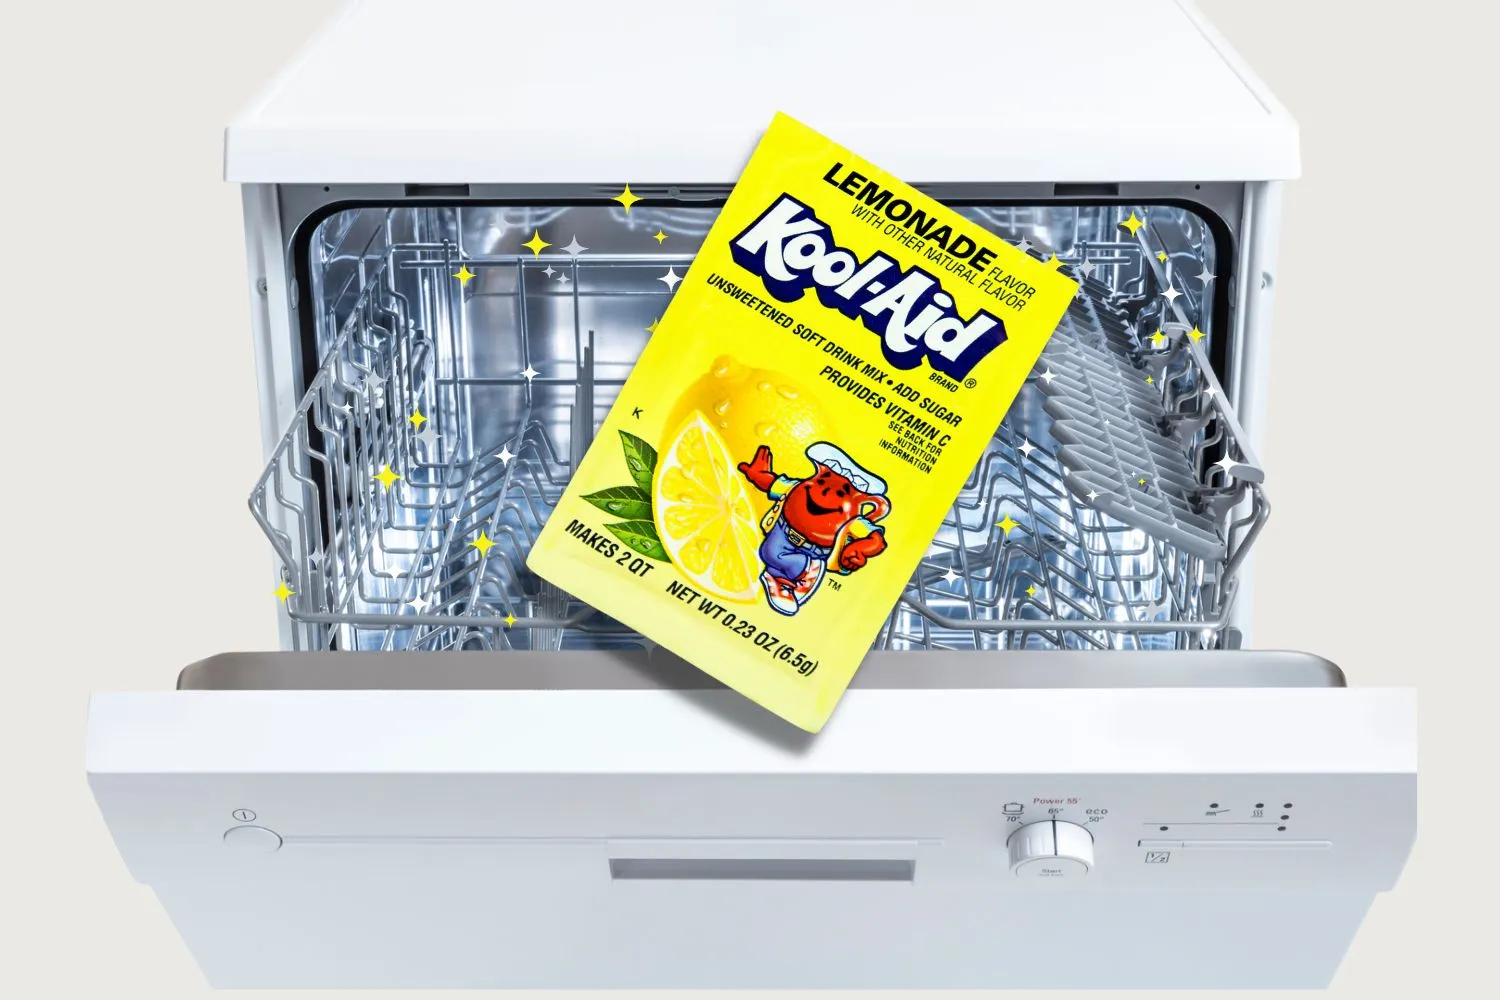 How to Clean Your Dishwasher with Lemon Kool-Aid: A Natural and Effective Solution